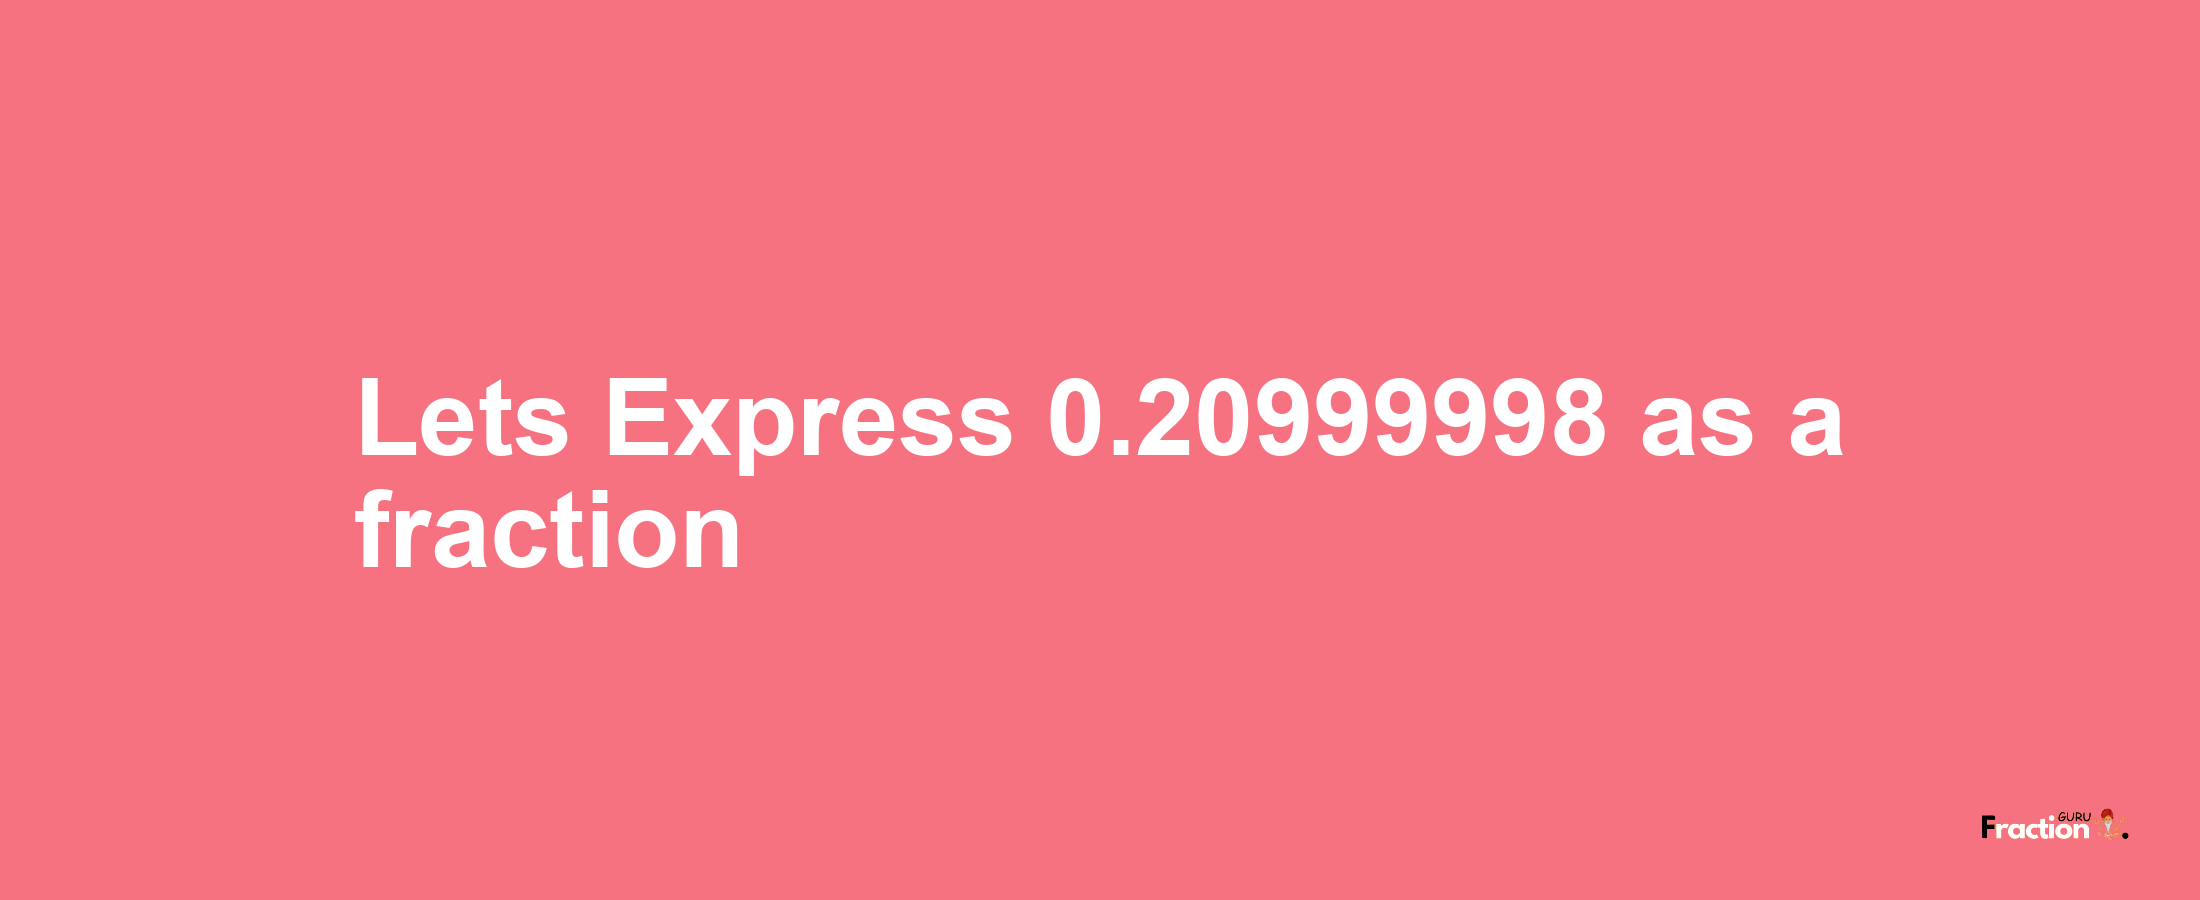 Lets Express 0.20999998 as afraction